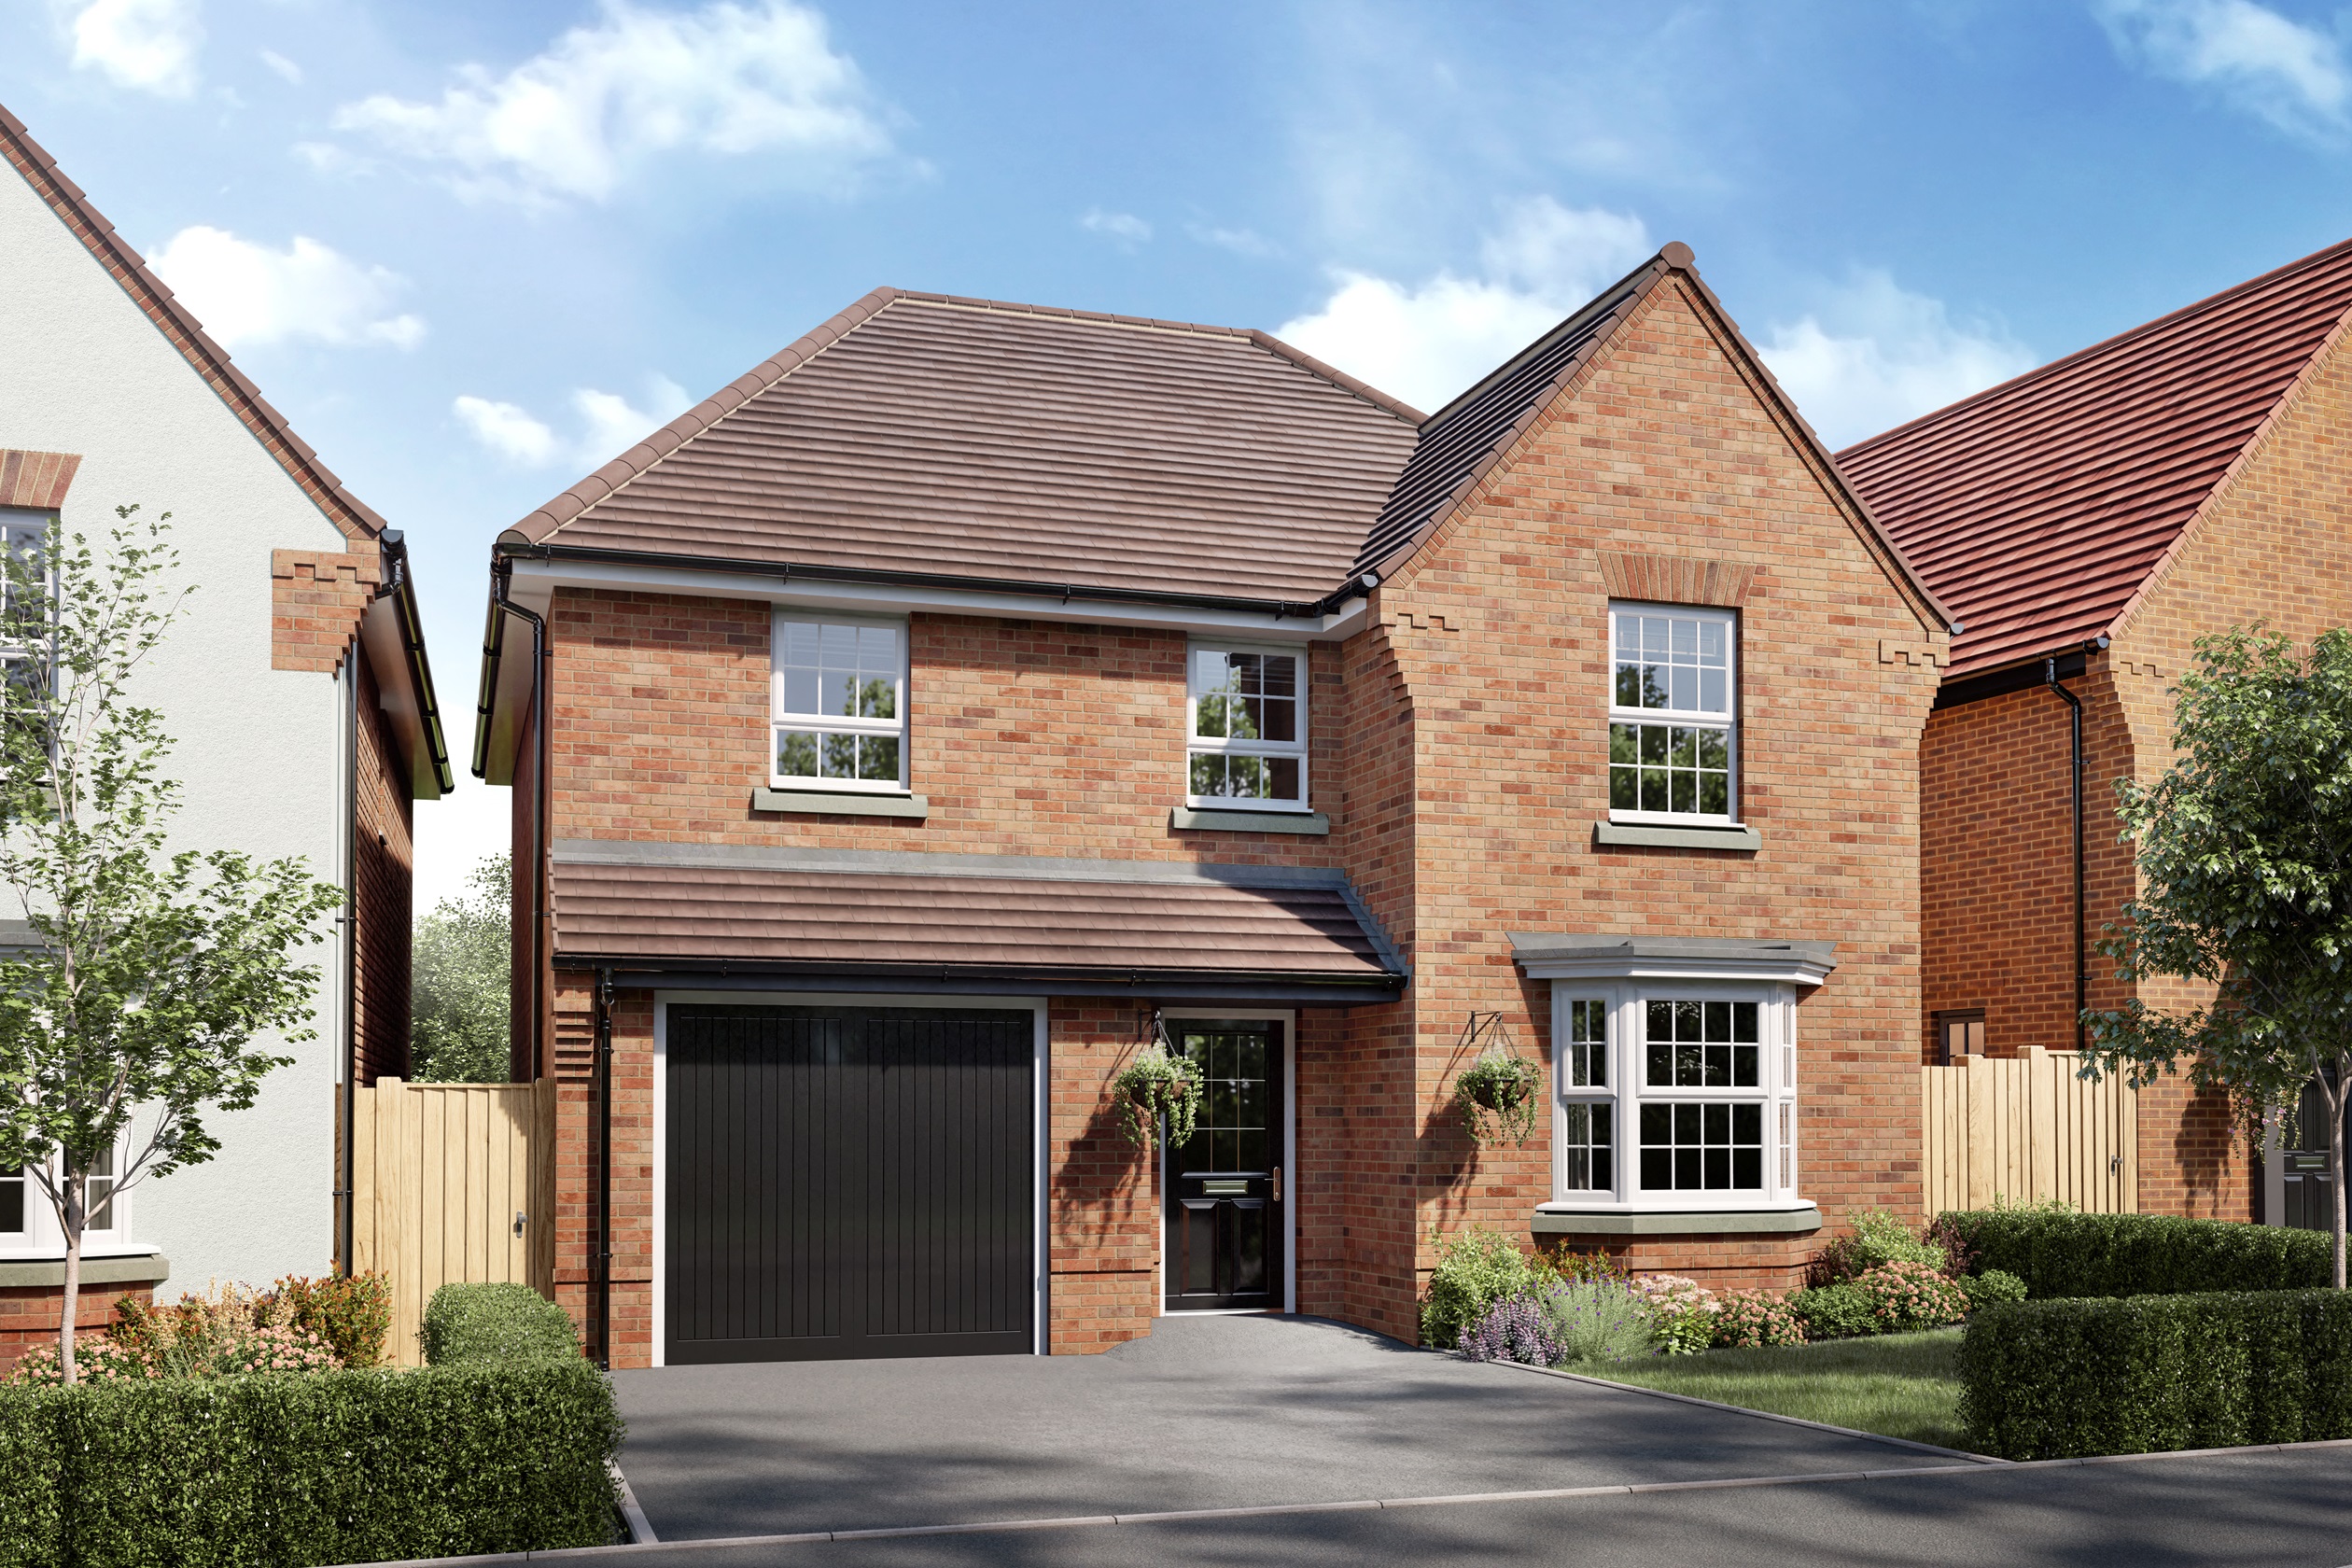 Property 2 of 9. External CGI Detached Home With Integral Garage